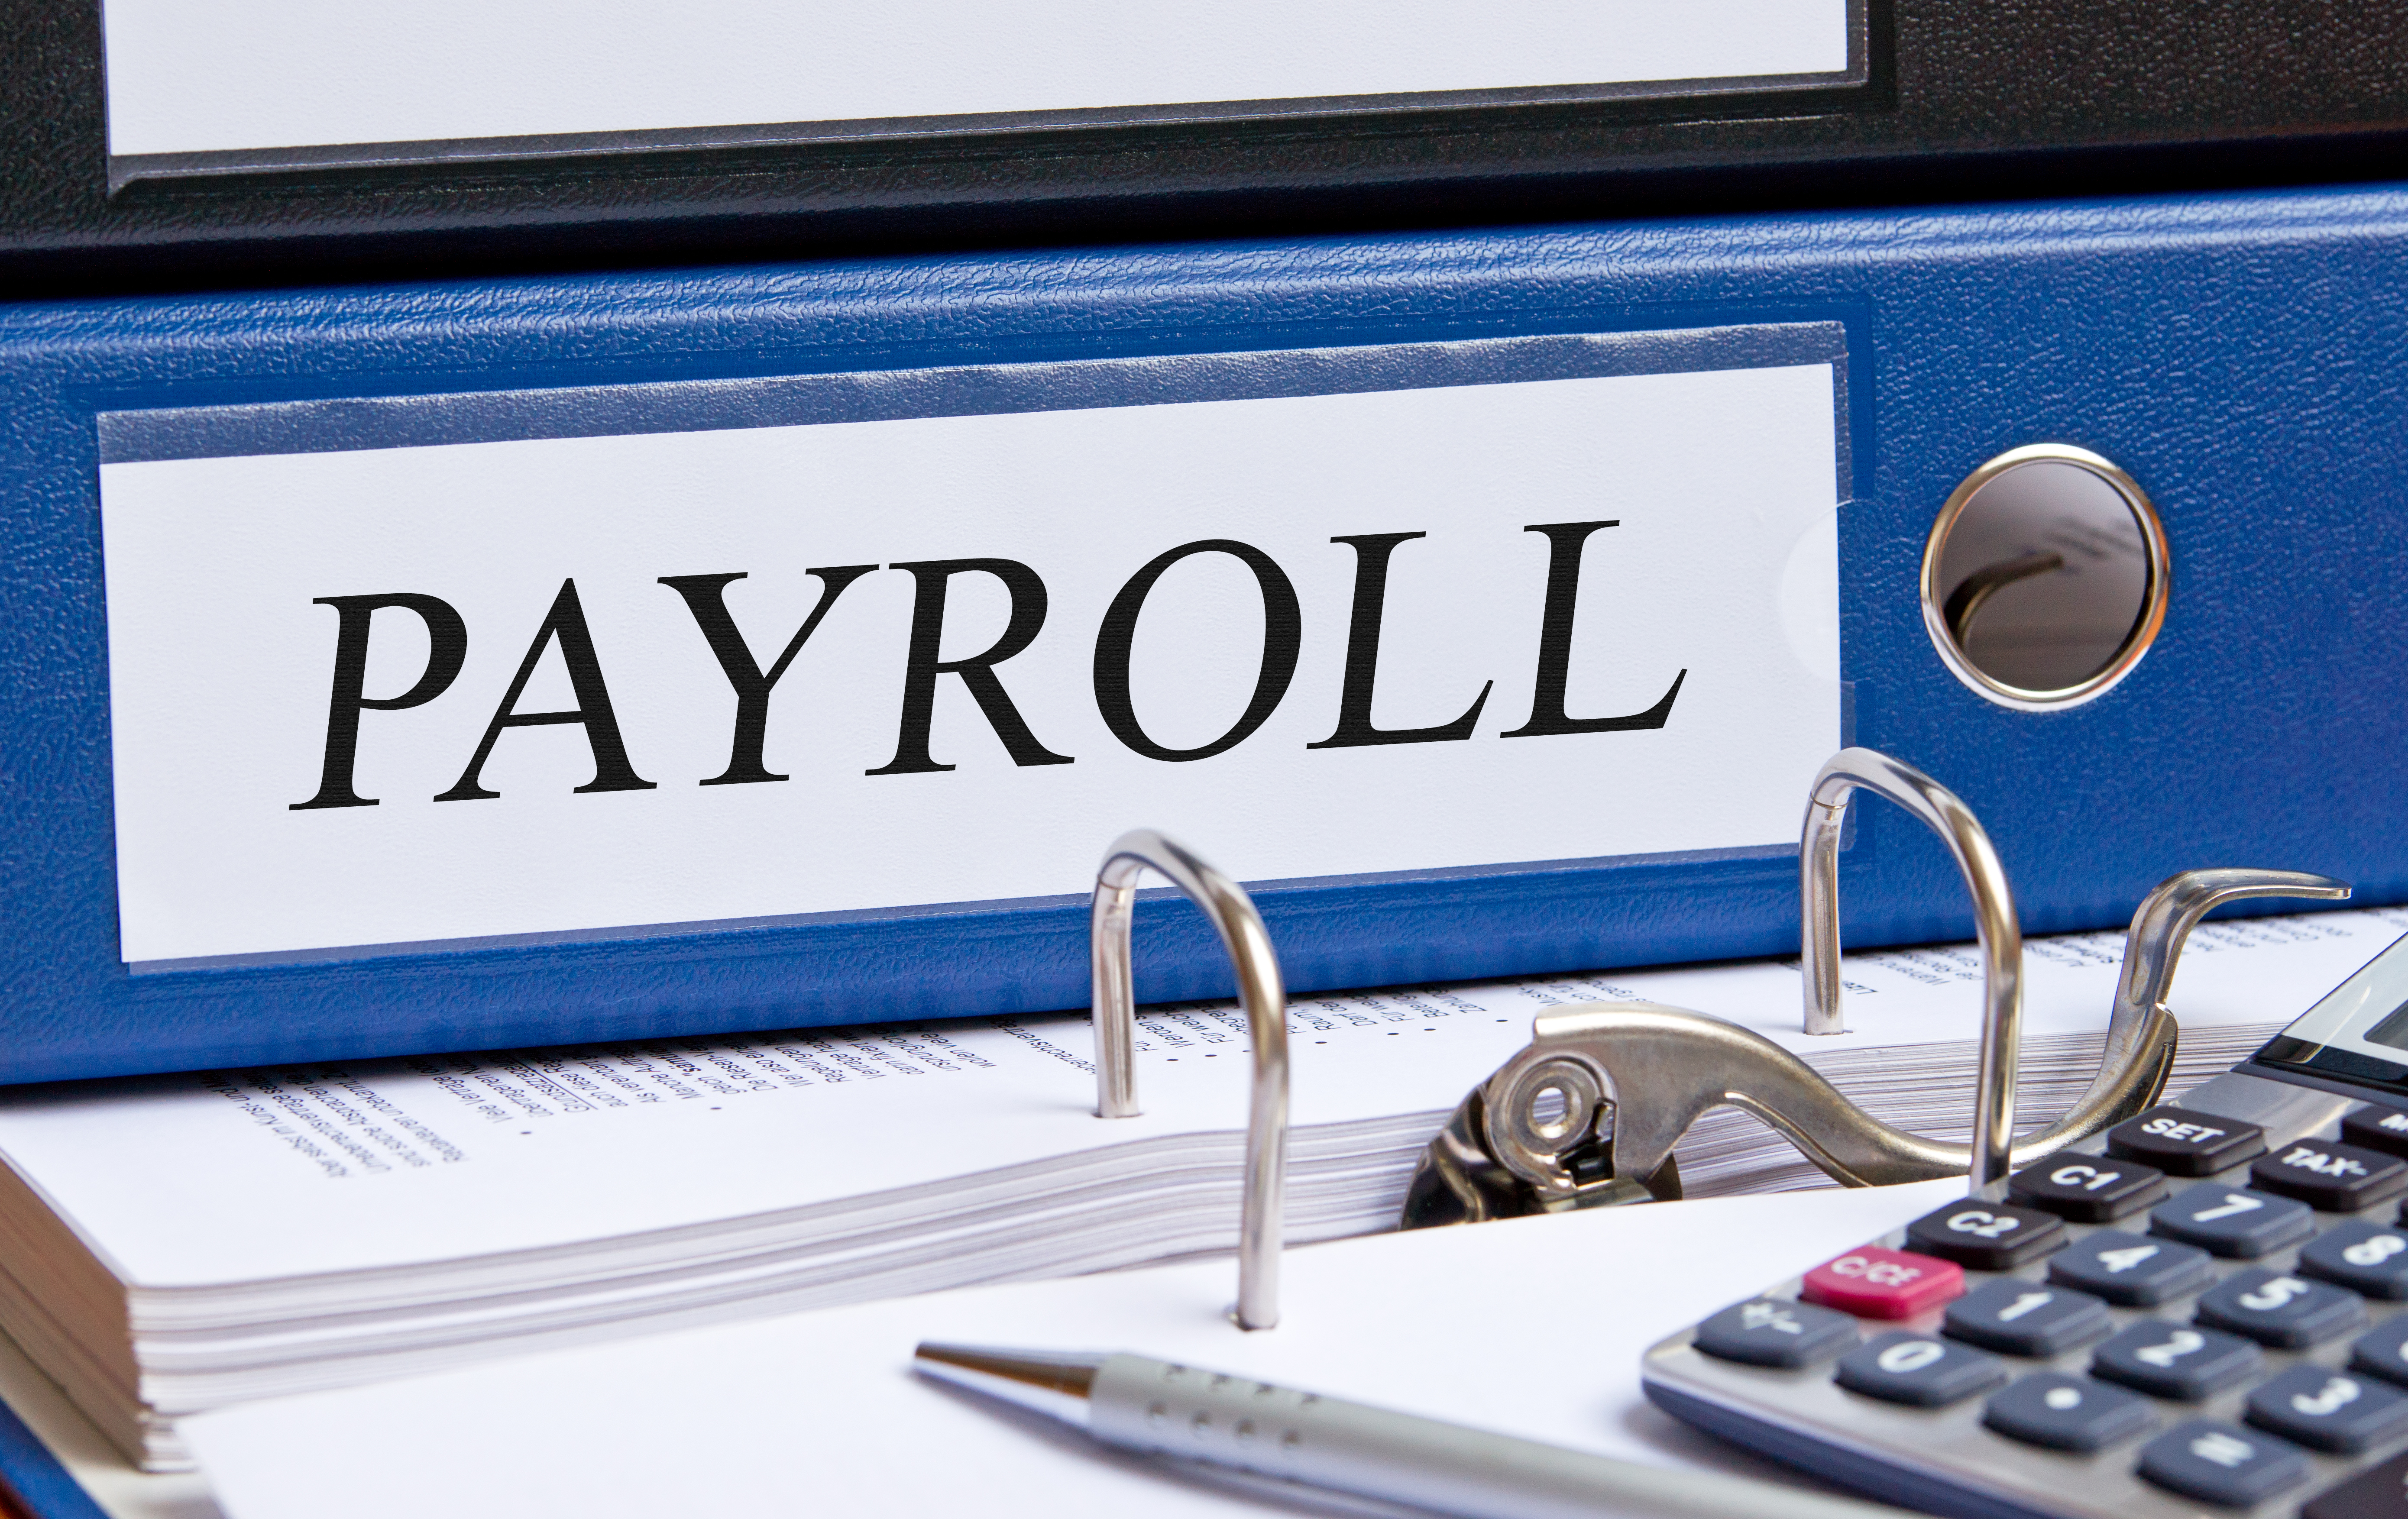 Payroll Services 